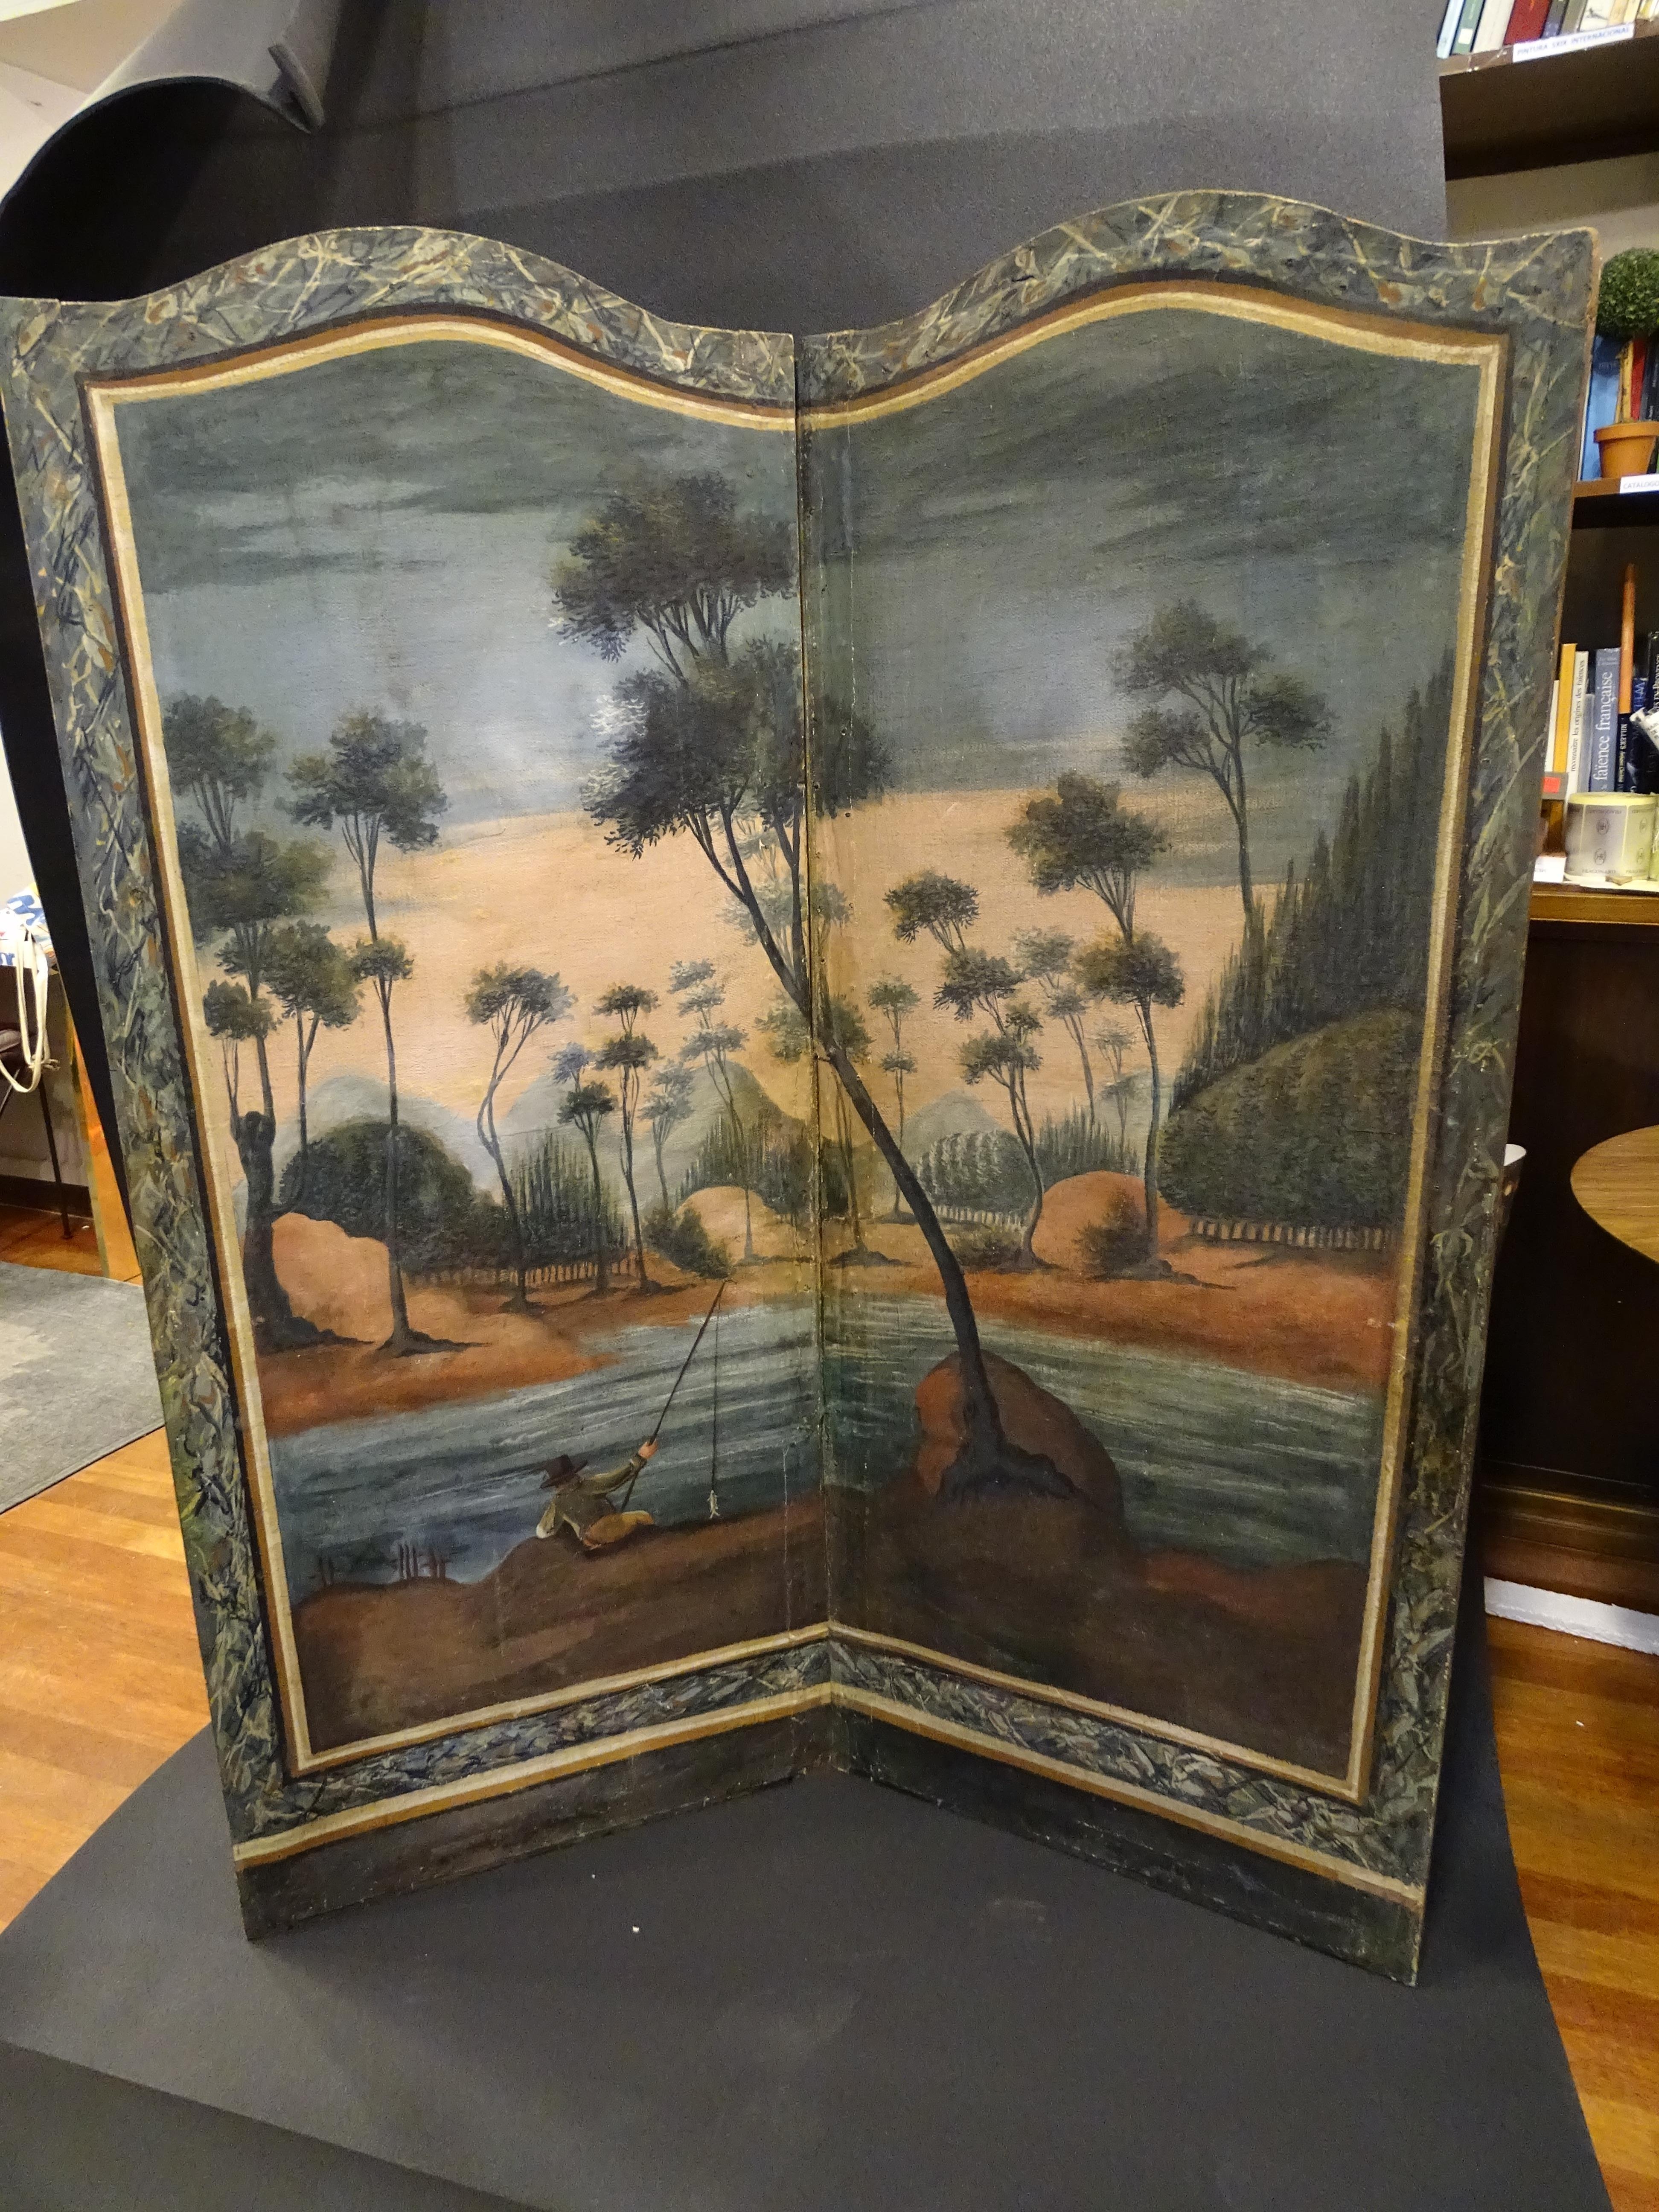 Outstanding two-leaf screen composed of two oil paintings on canvas framed in stuccoed wood. 18th century, France.
Acquired from a private collection in Uzes, southern France.

Representation of a river landscape surrounded by pine trees, a